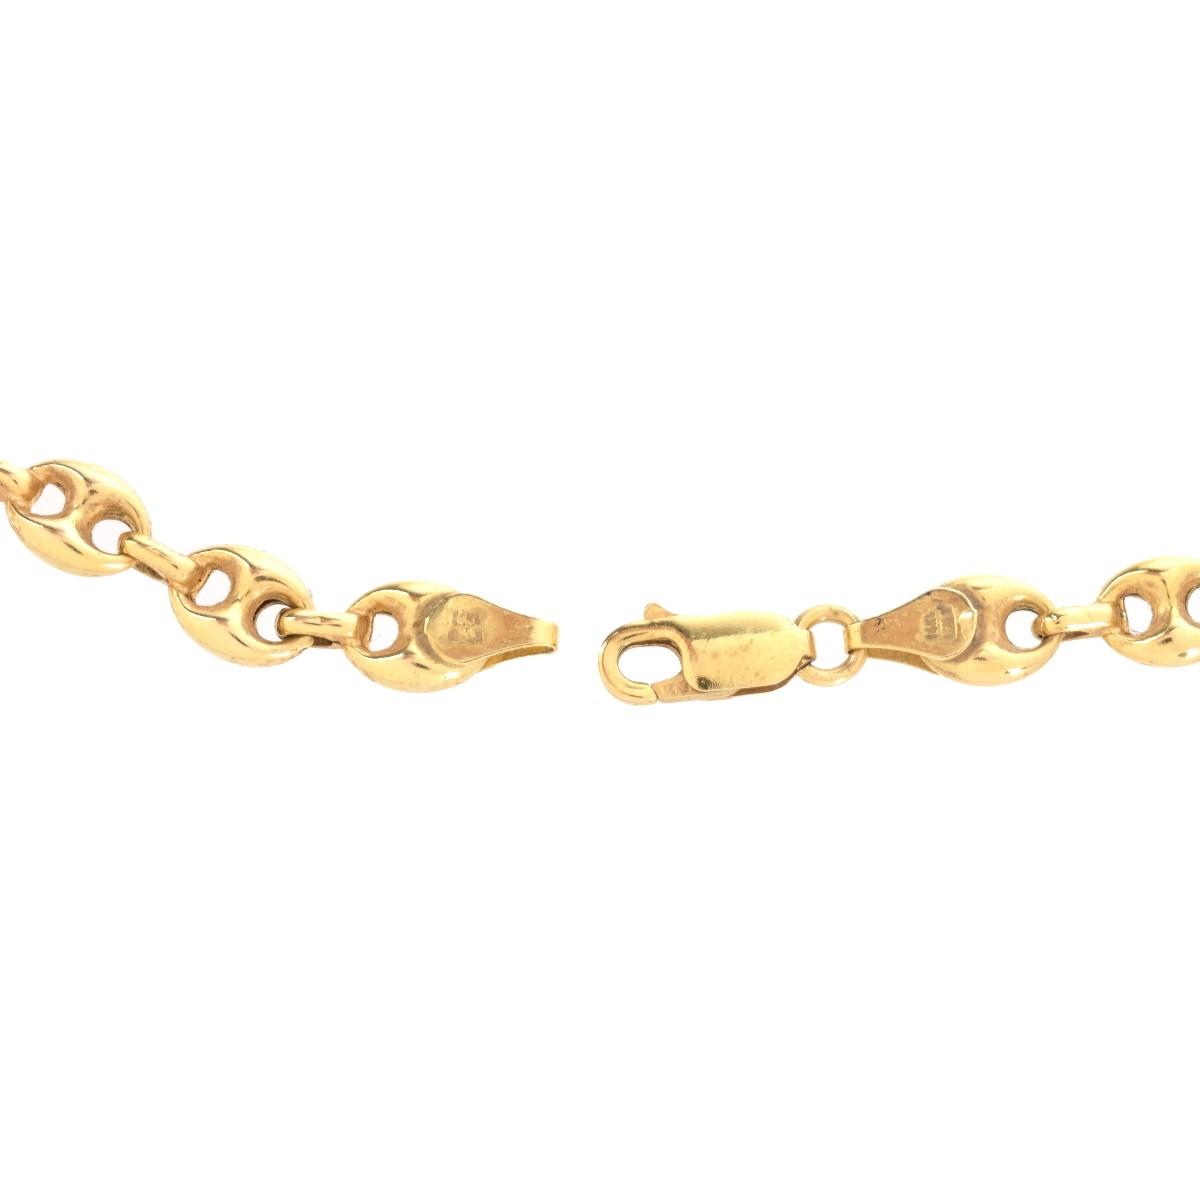 Gucci style 14K Necklace